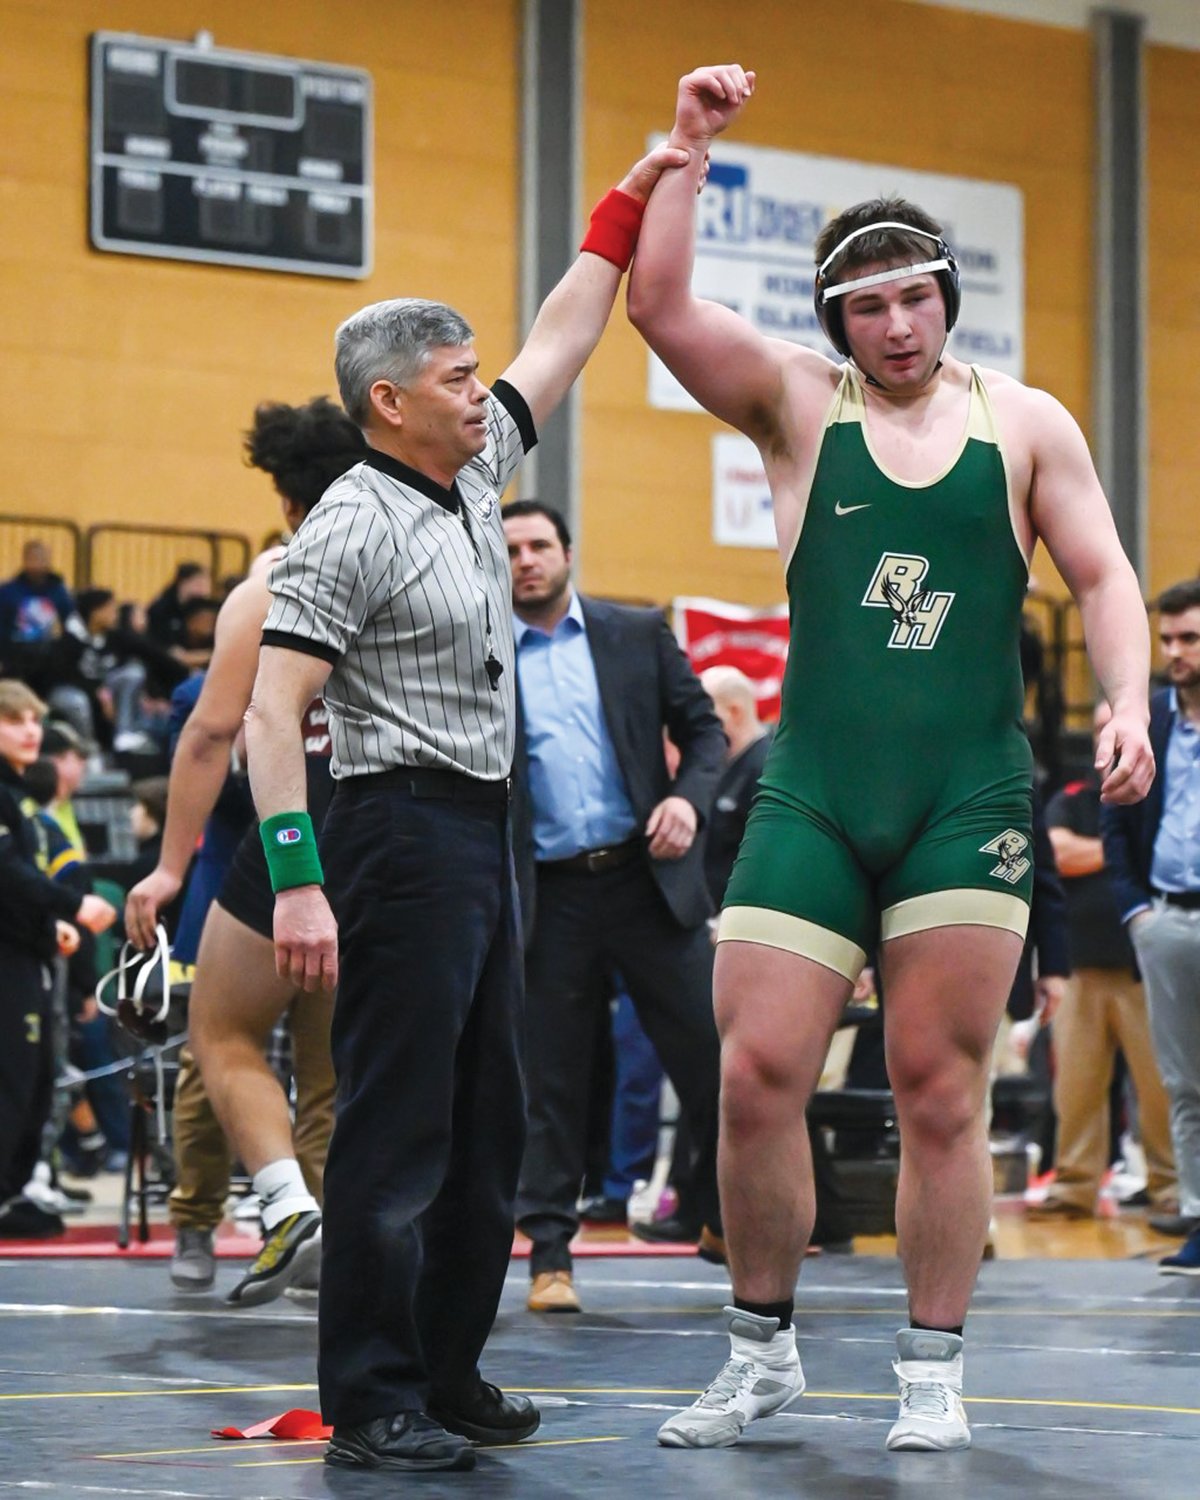 STATE CHAMP: Bishop Hendricken’s Joe Church, who won the heavyweight state championship last weekend and will be heading to this weekend’s New England Championships. (Photo by Leo van Dijk/rhodyphoto.zenfolio.com)